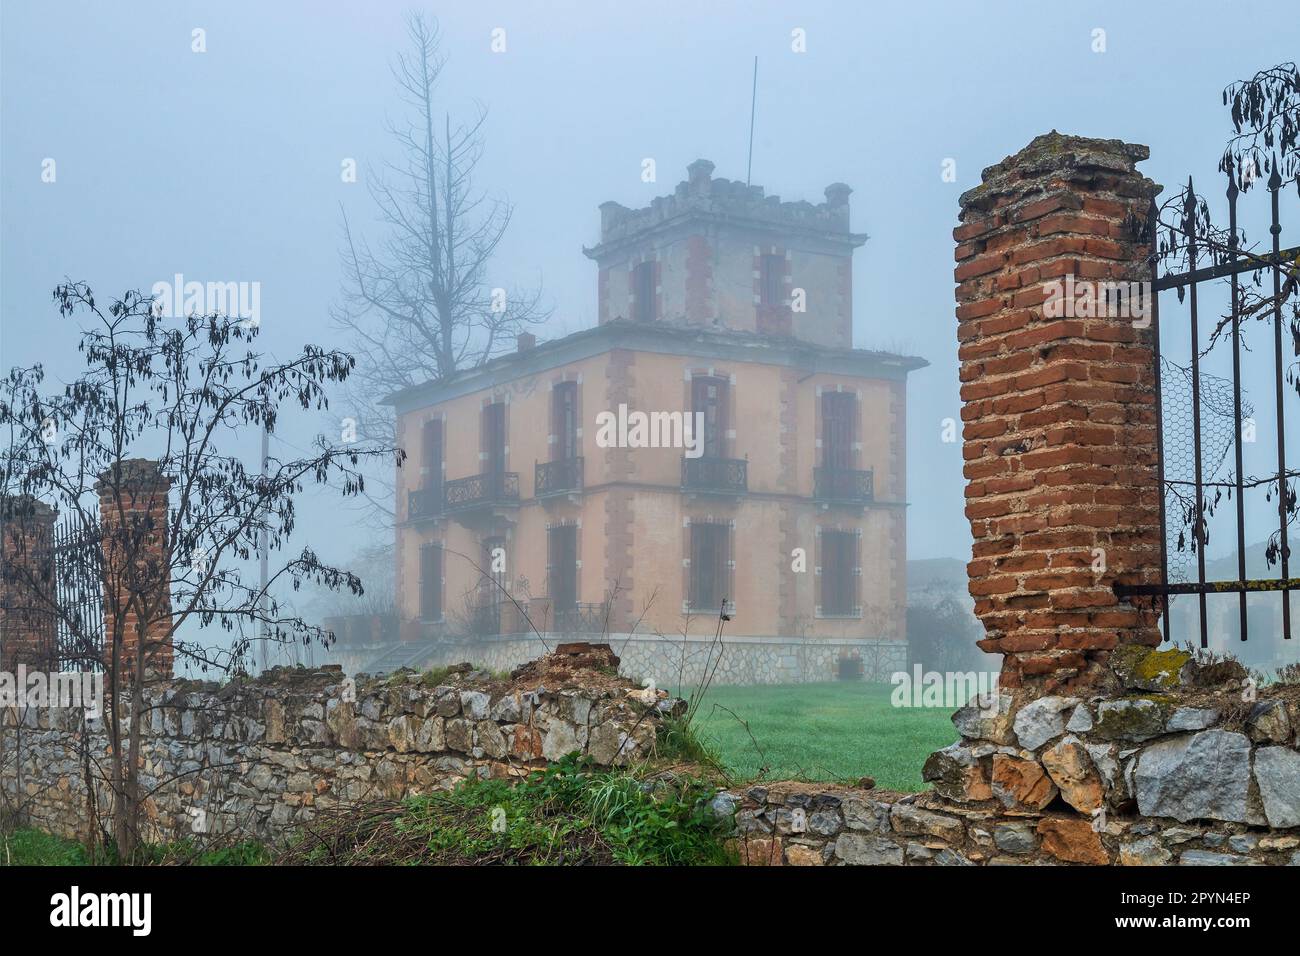 The Charokopos tower, an old, abandoned mansion in Giannouli town, Larissa, Thessaly, Greece. Stock Photo